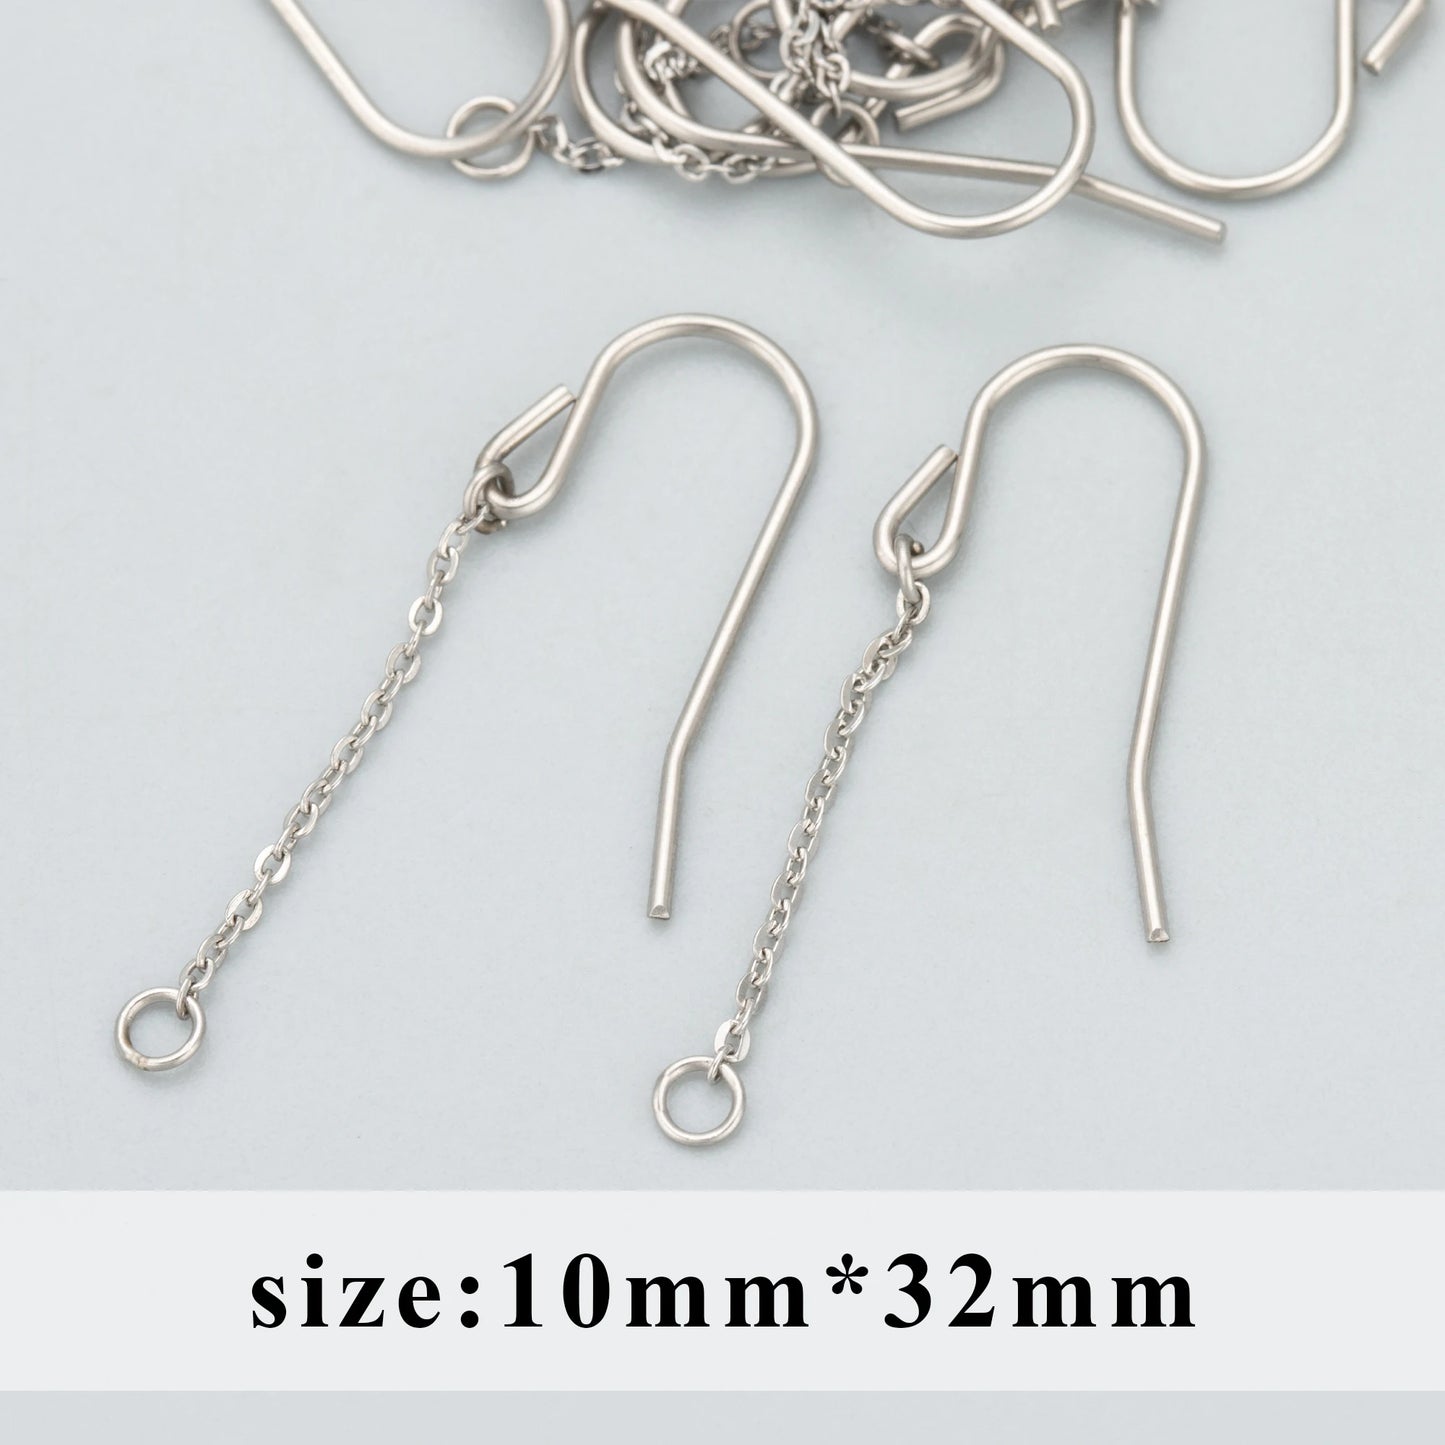 GUFEATHER MC43,jewelry accessories,316L stainless steel,nickel free,connector hook,jewelry making,diy earrings,10pcs/lot